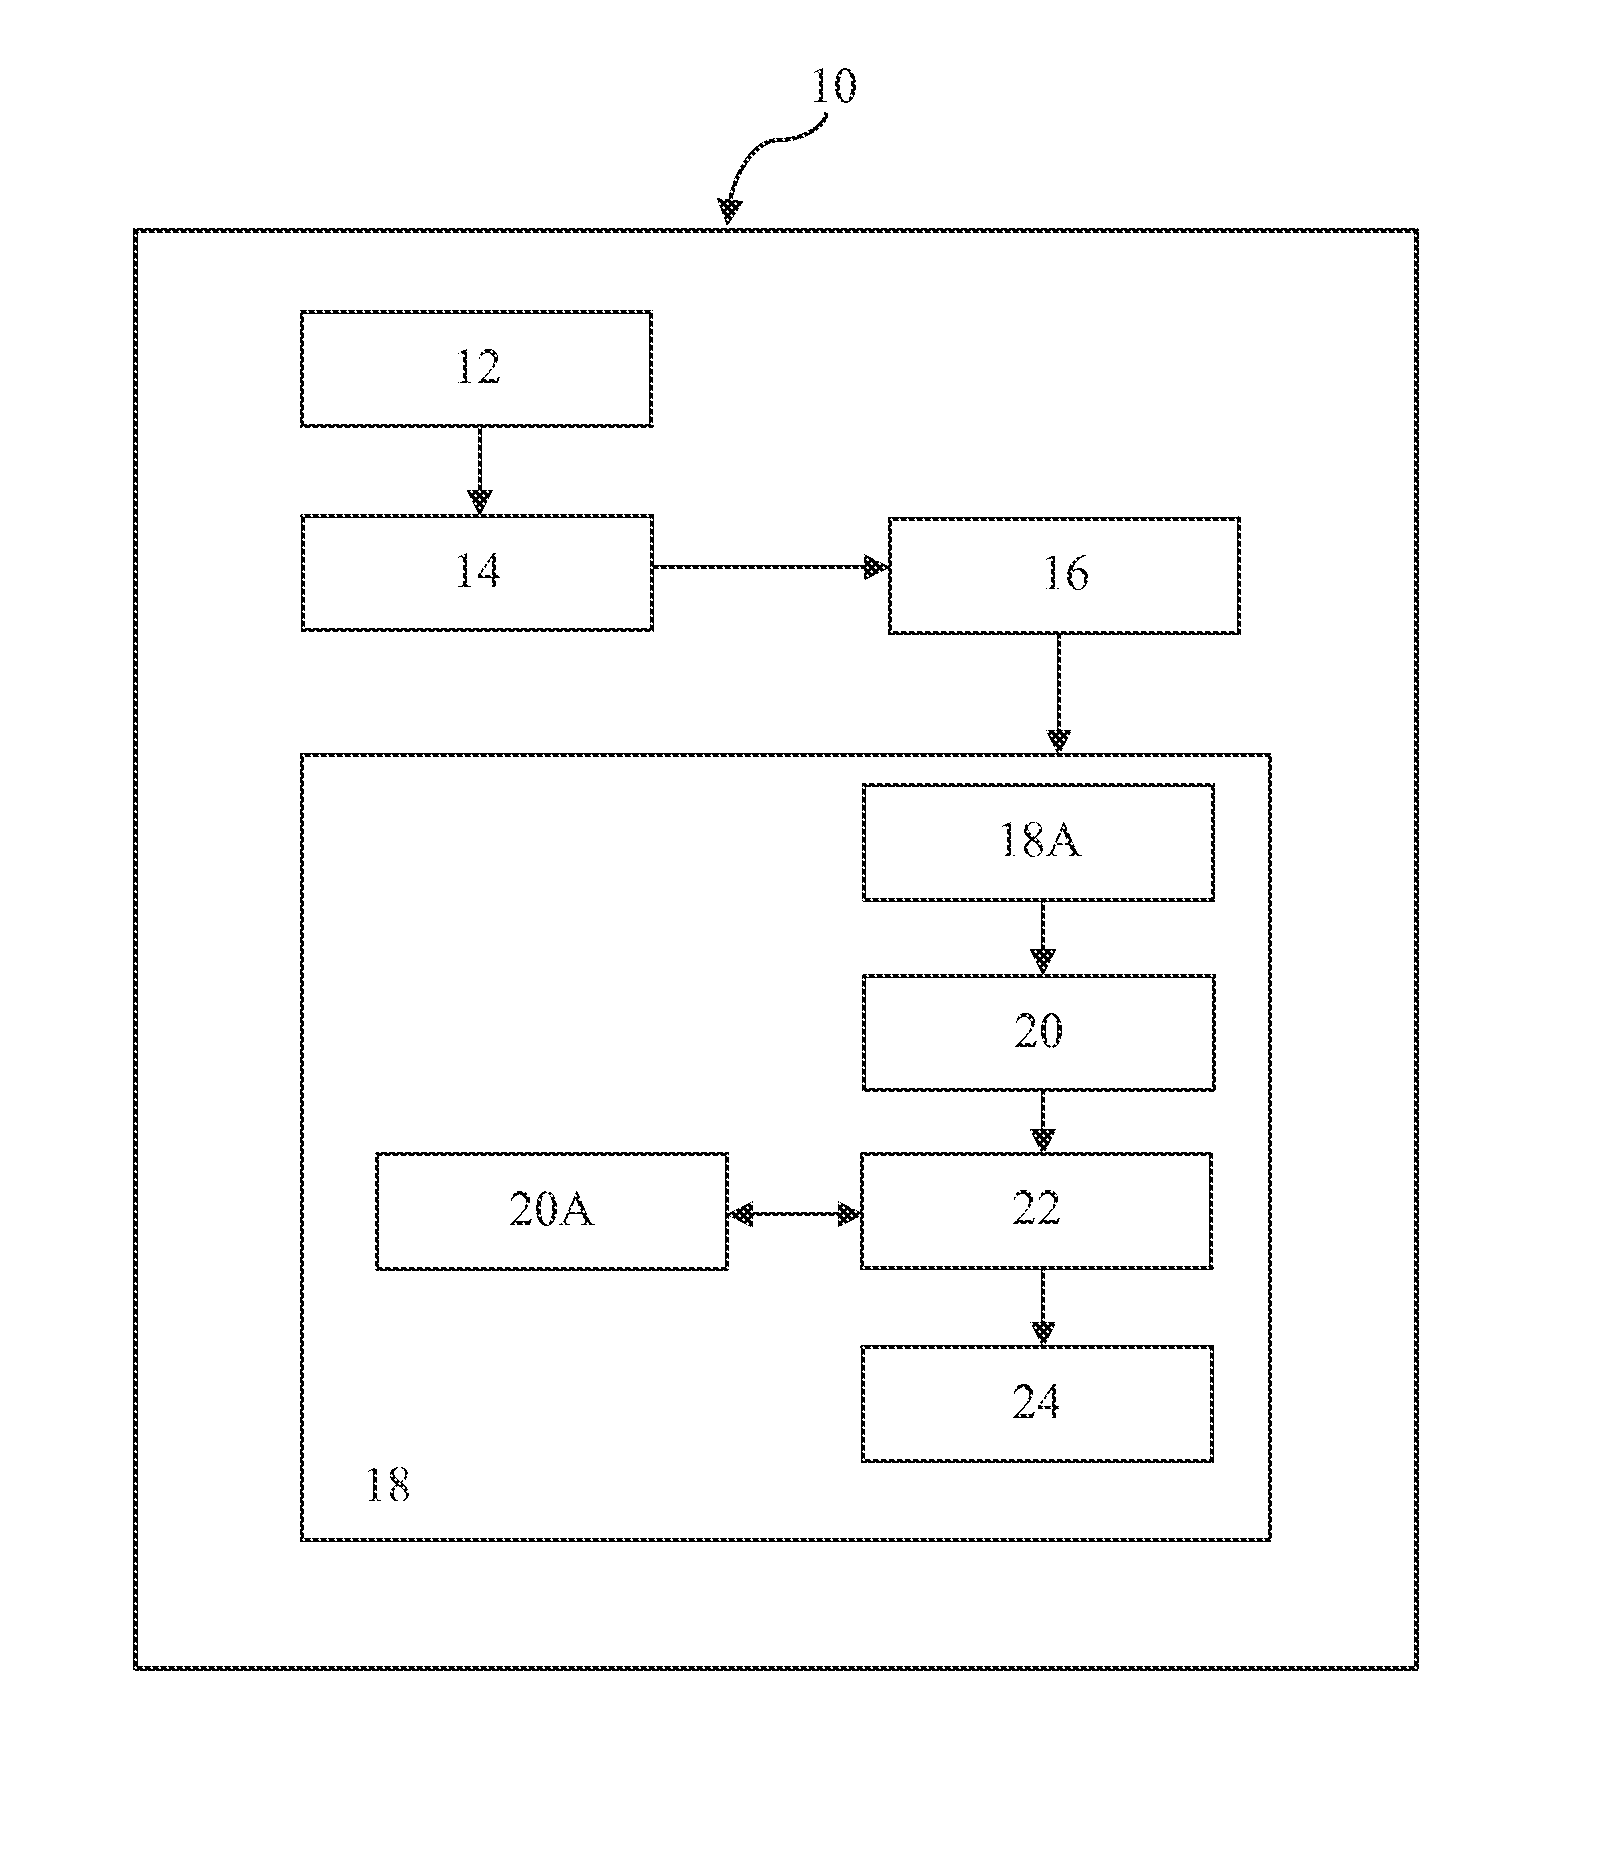 Computer implemented system and method for indexing and annotating use cases and generating test scenarios therefrom